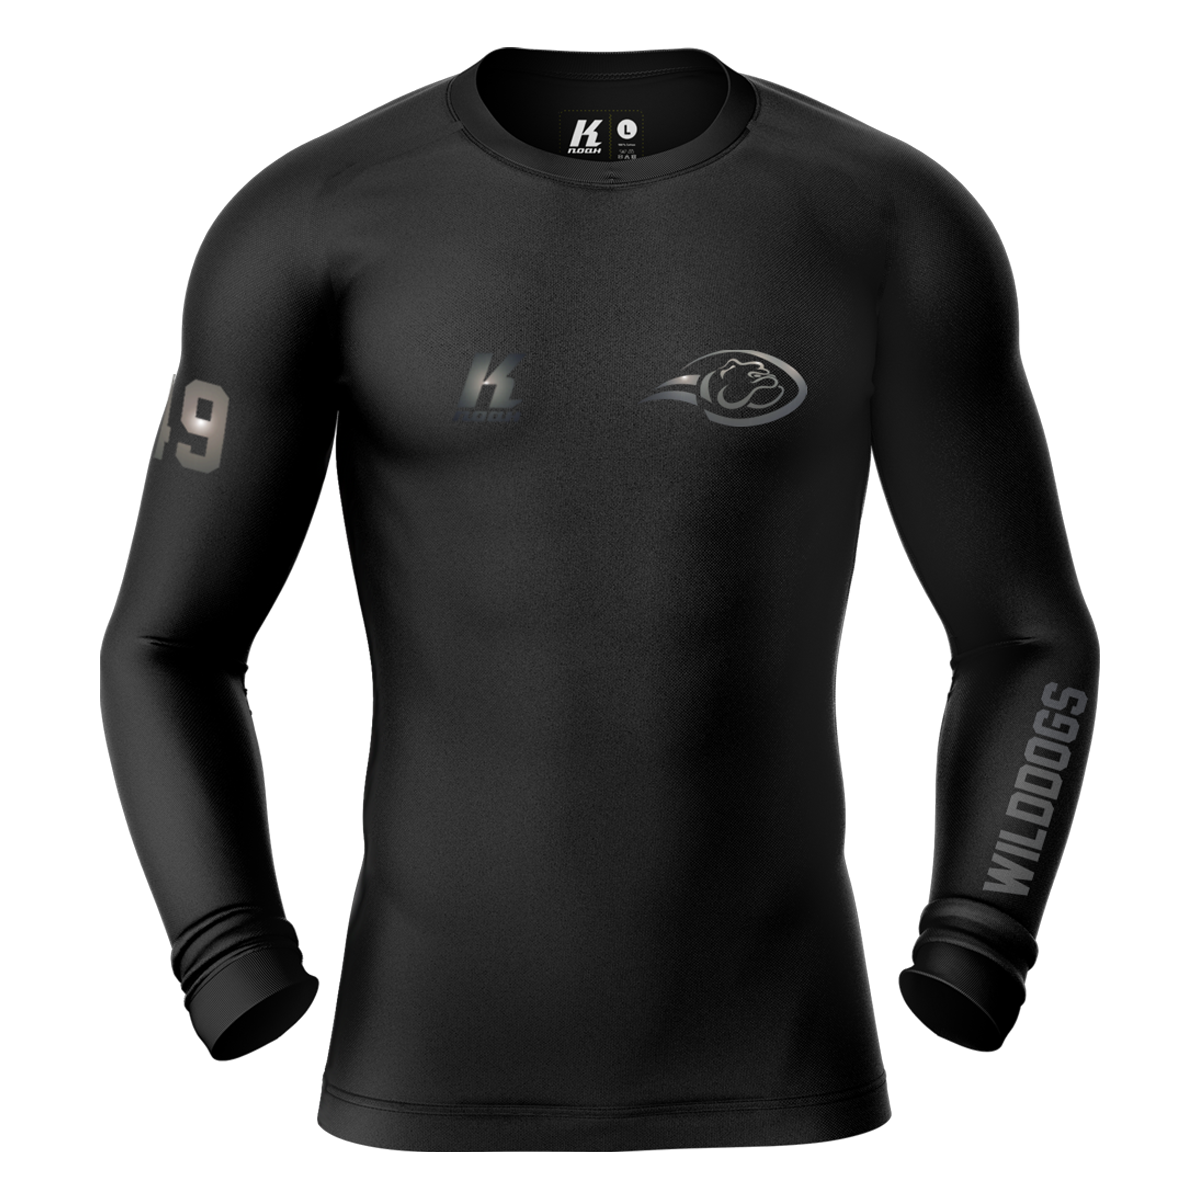 Wilddogs "Blackline" K.Tech Compression Longsleeve Shirt with Playernumber/Initials